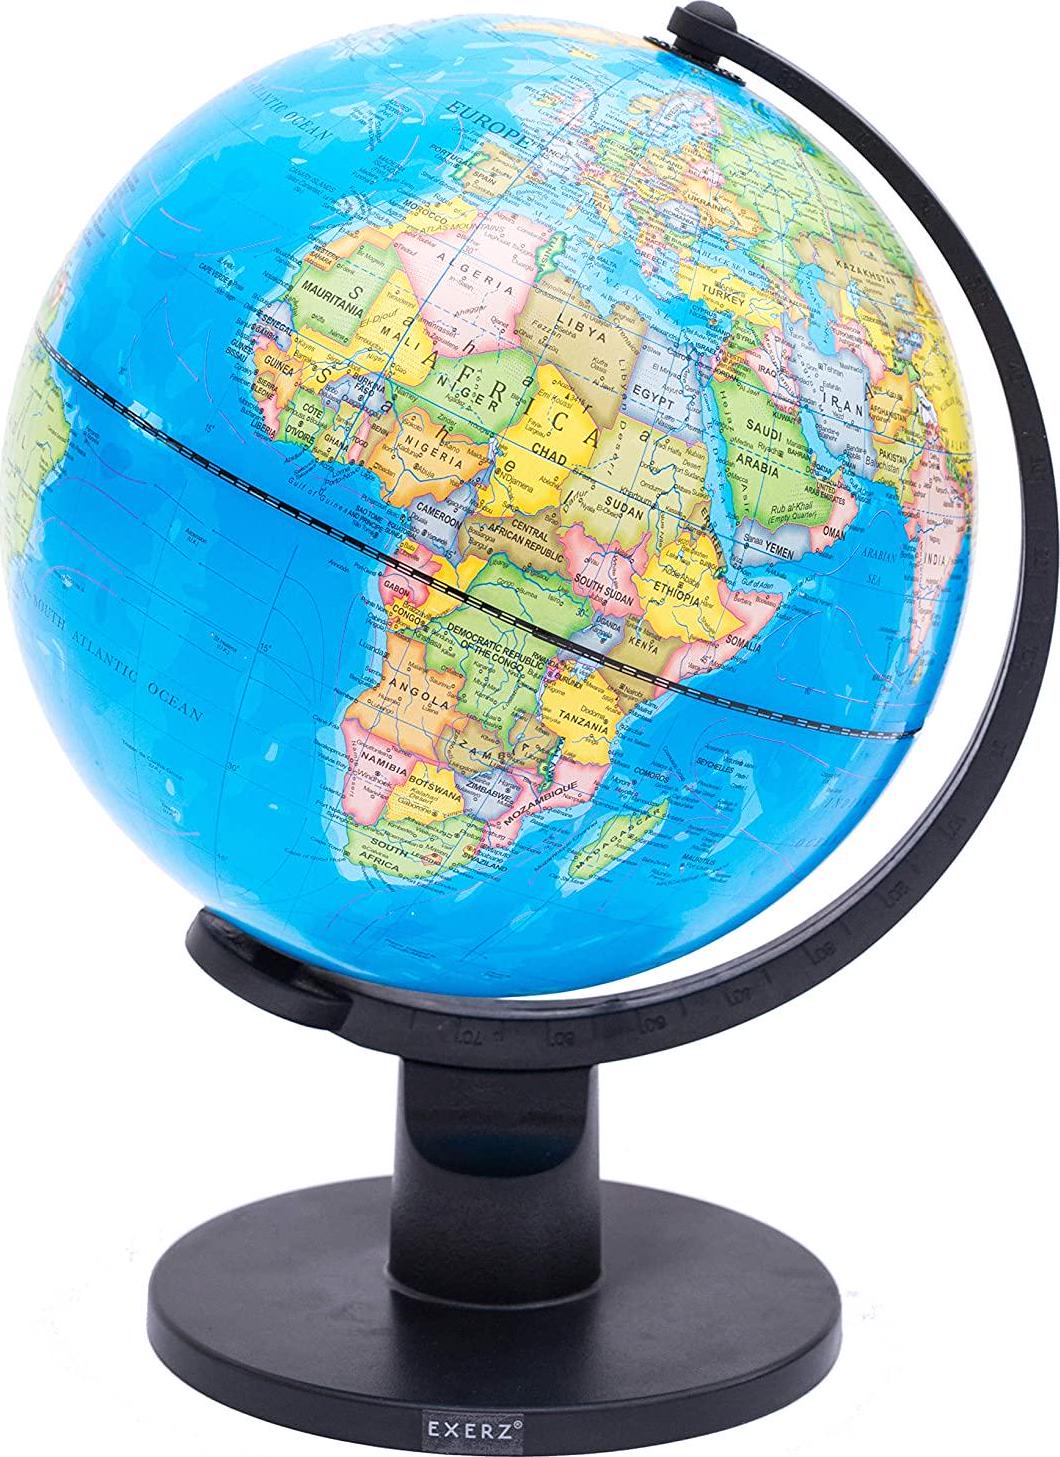 Exerz, Exerz 25cm World Globe Educational Political Map Swivel Rotating Desk Top Globe - Geography Learning Home School Office Decoration - Diameter 25cm